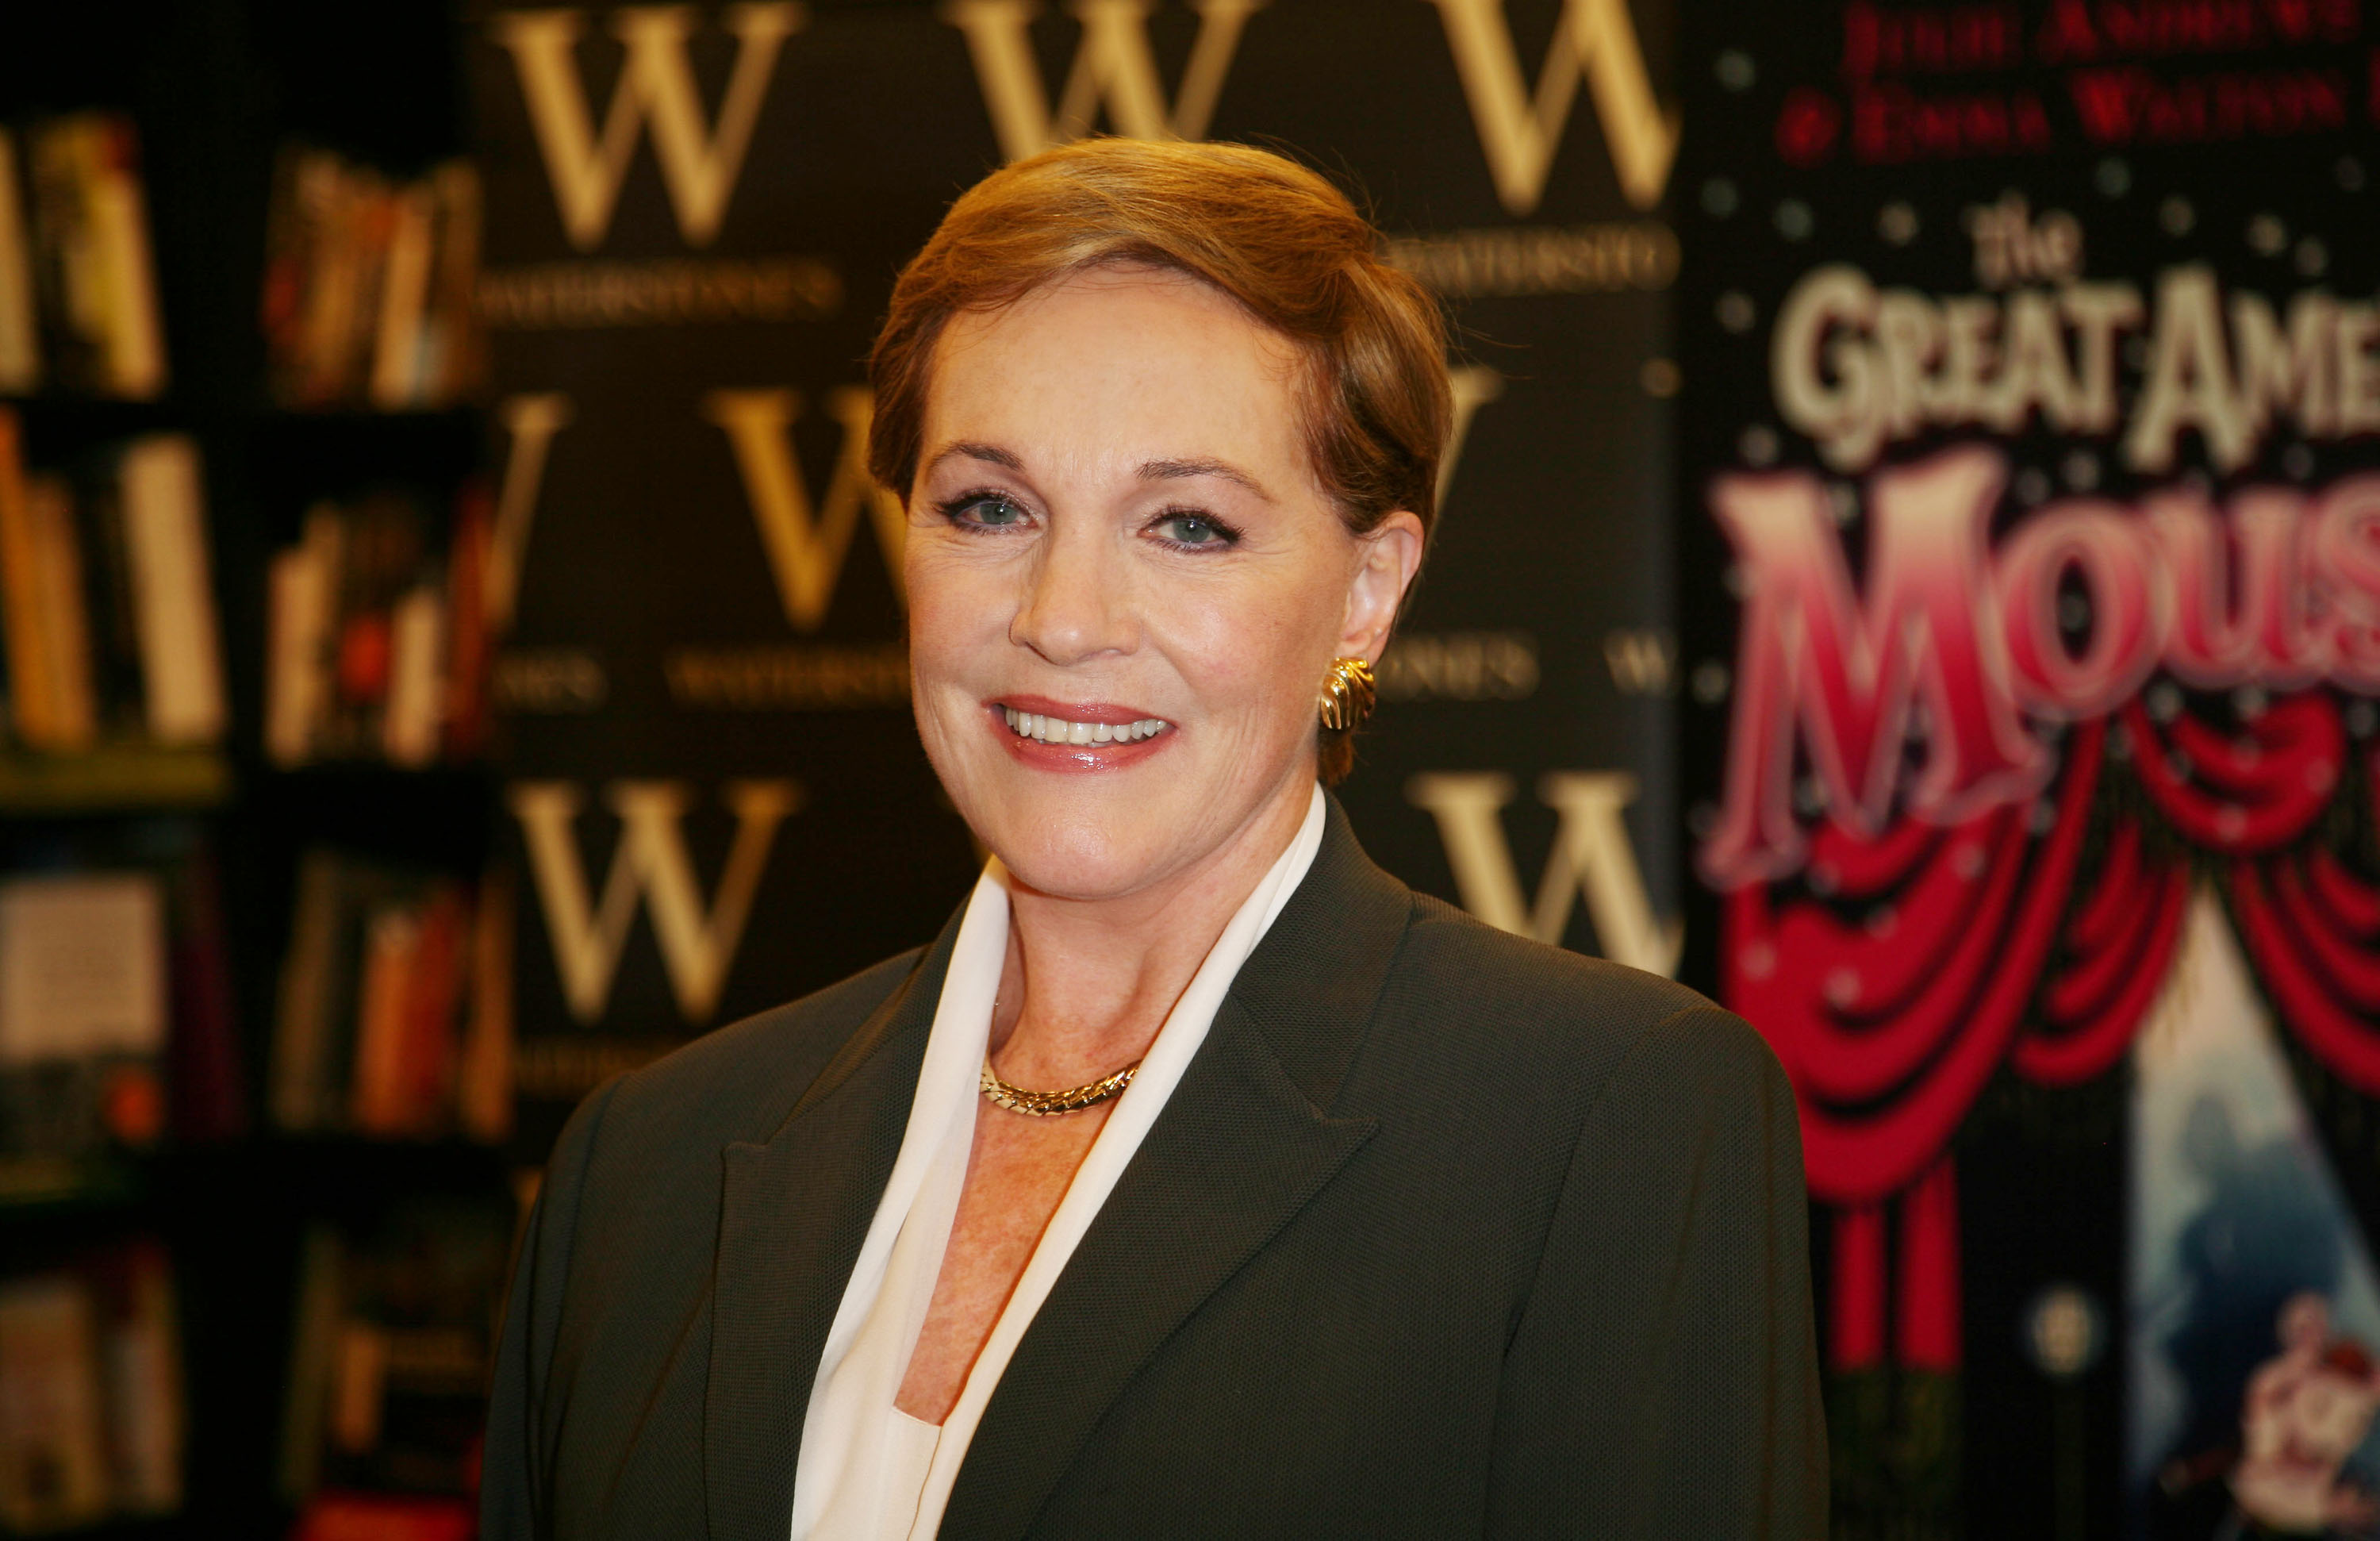 Living Legend Julie Andrews Will Voice A Powerful Sea Creature In ‘Aquaman’